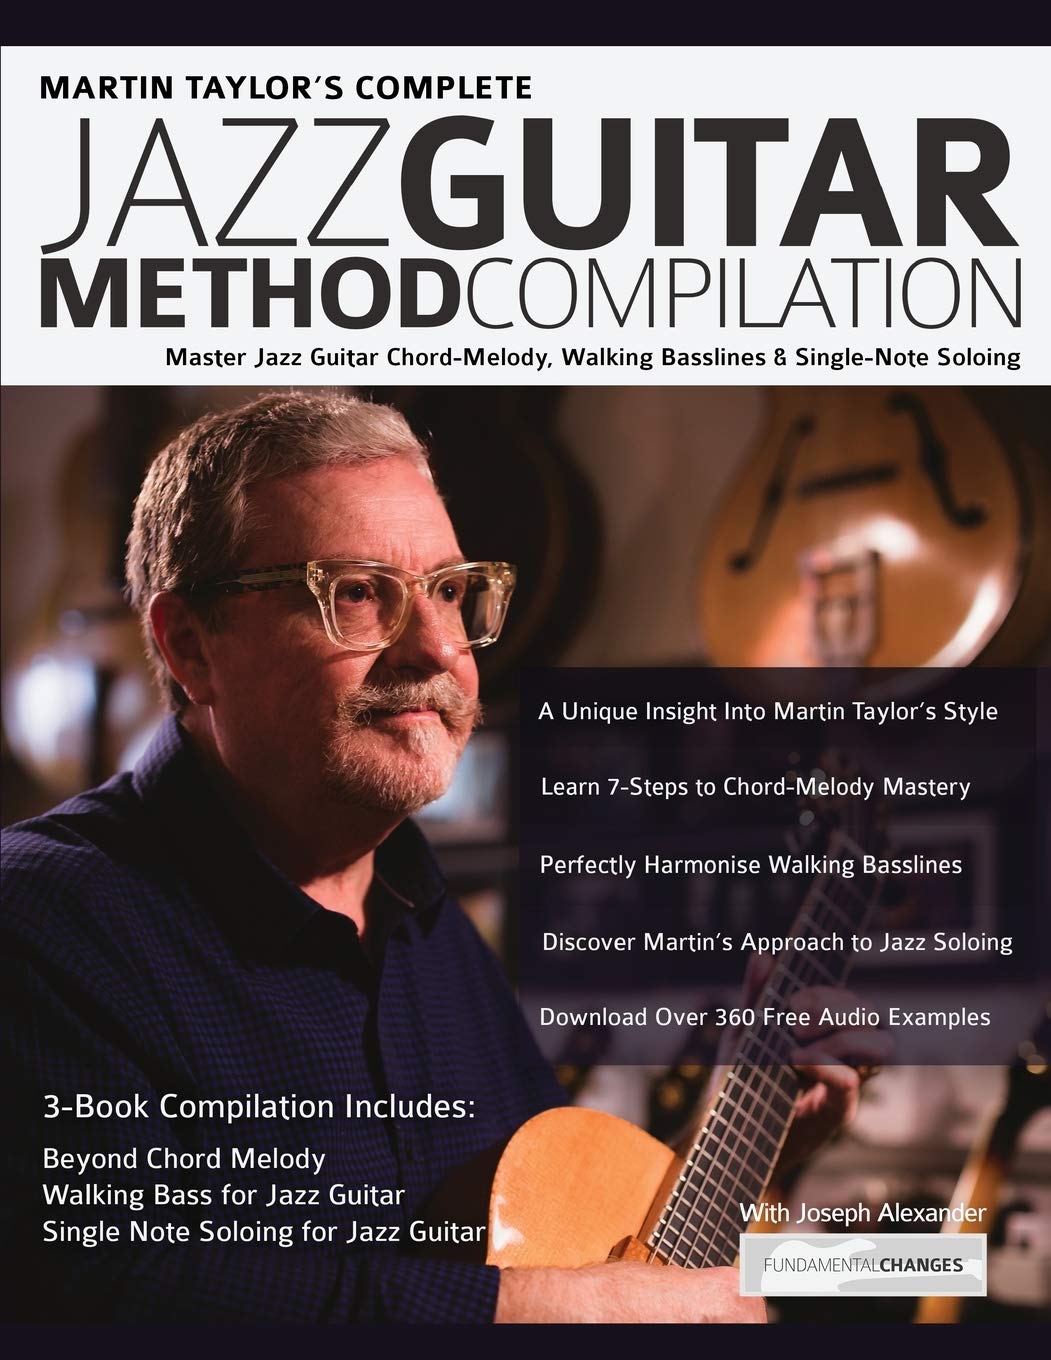 Martin Taylor's Complete Jazz Guitar Method Compilation: Master Jazz Guitar Chord-Melody, Walking Basslines & Single-Note Soloing (Learn How to...